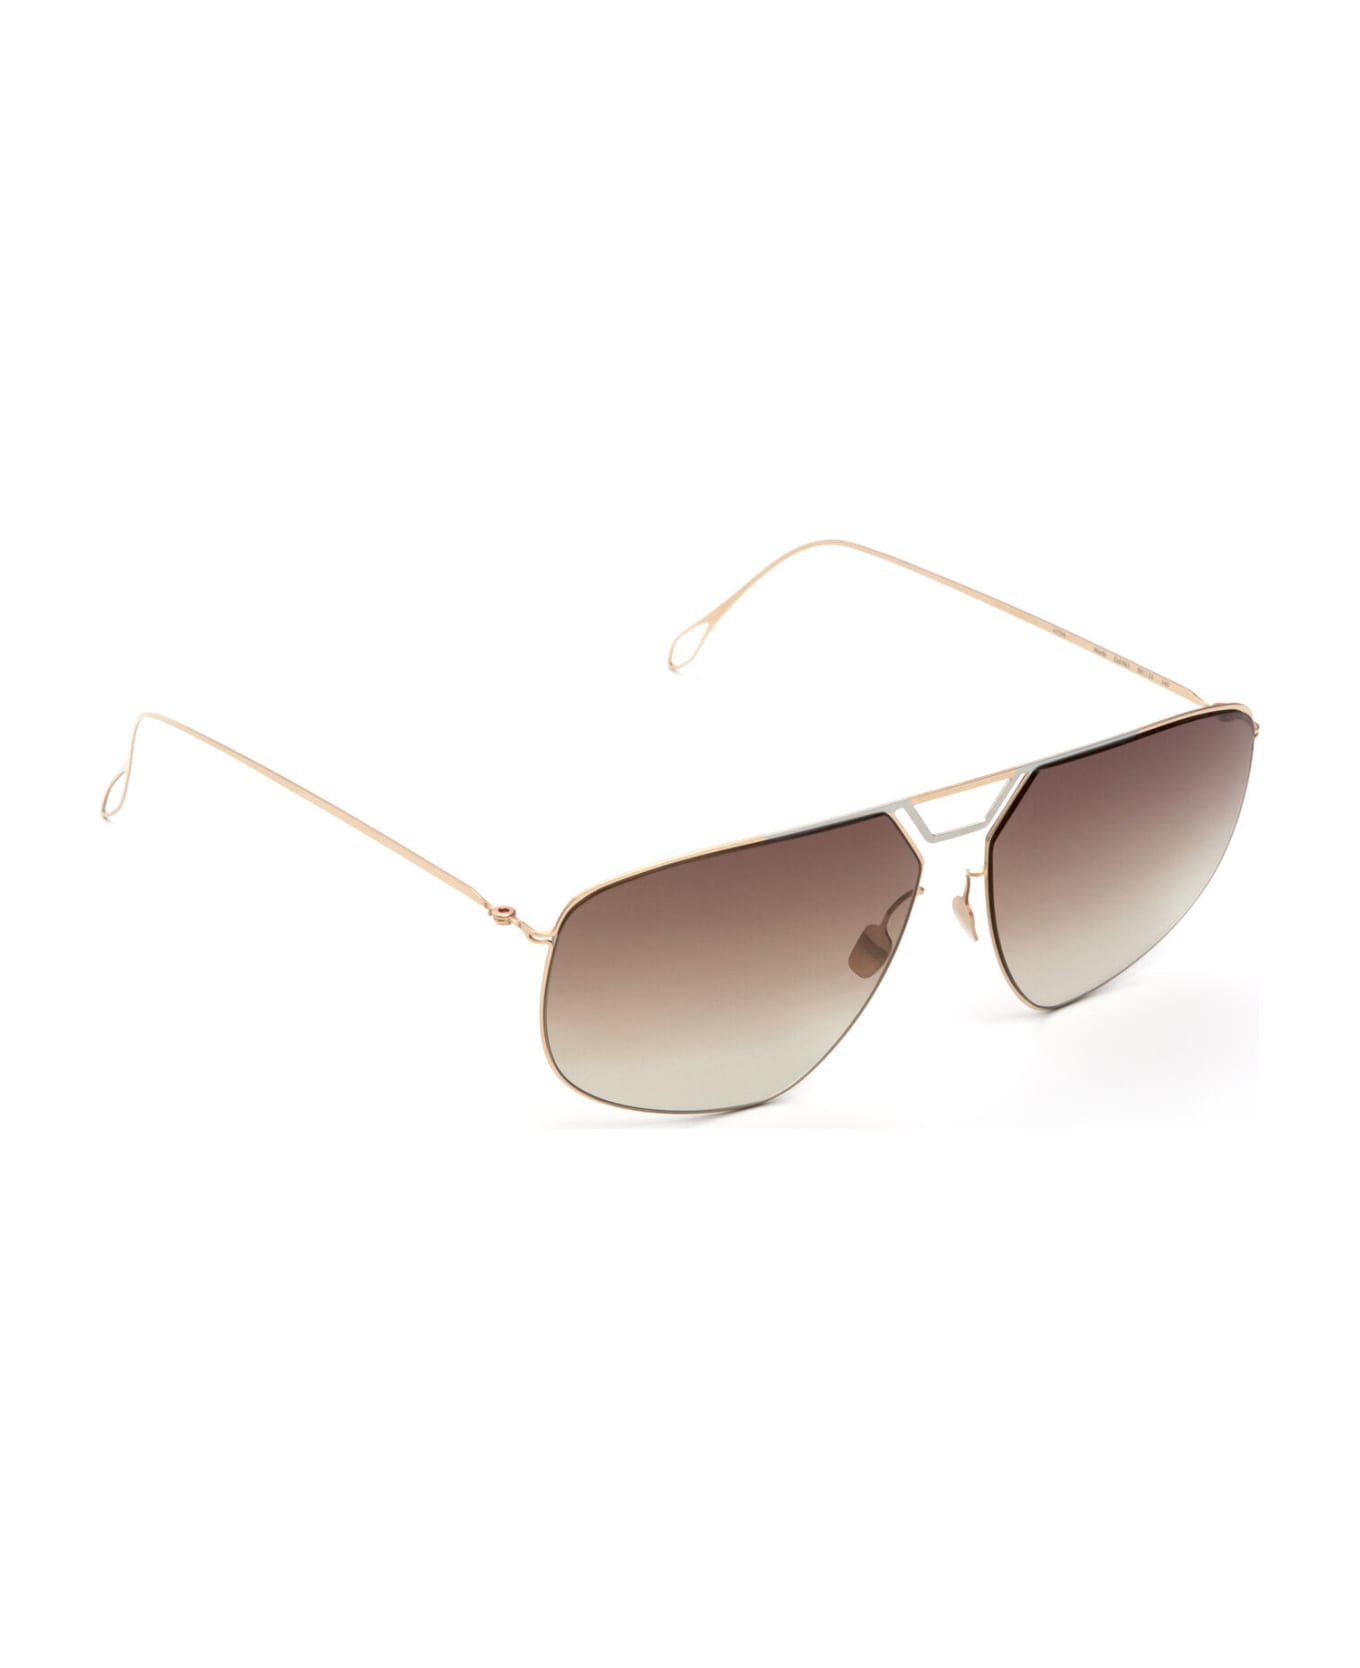 Haffmans & Neumeister North 041 Sunglasses Sunglasses - gold / silver